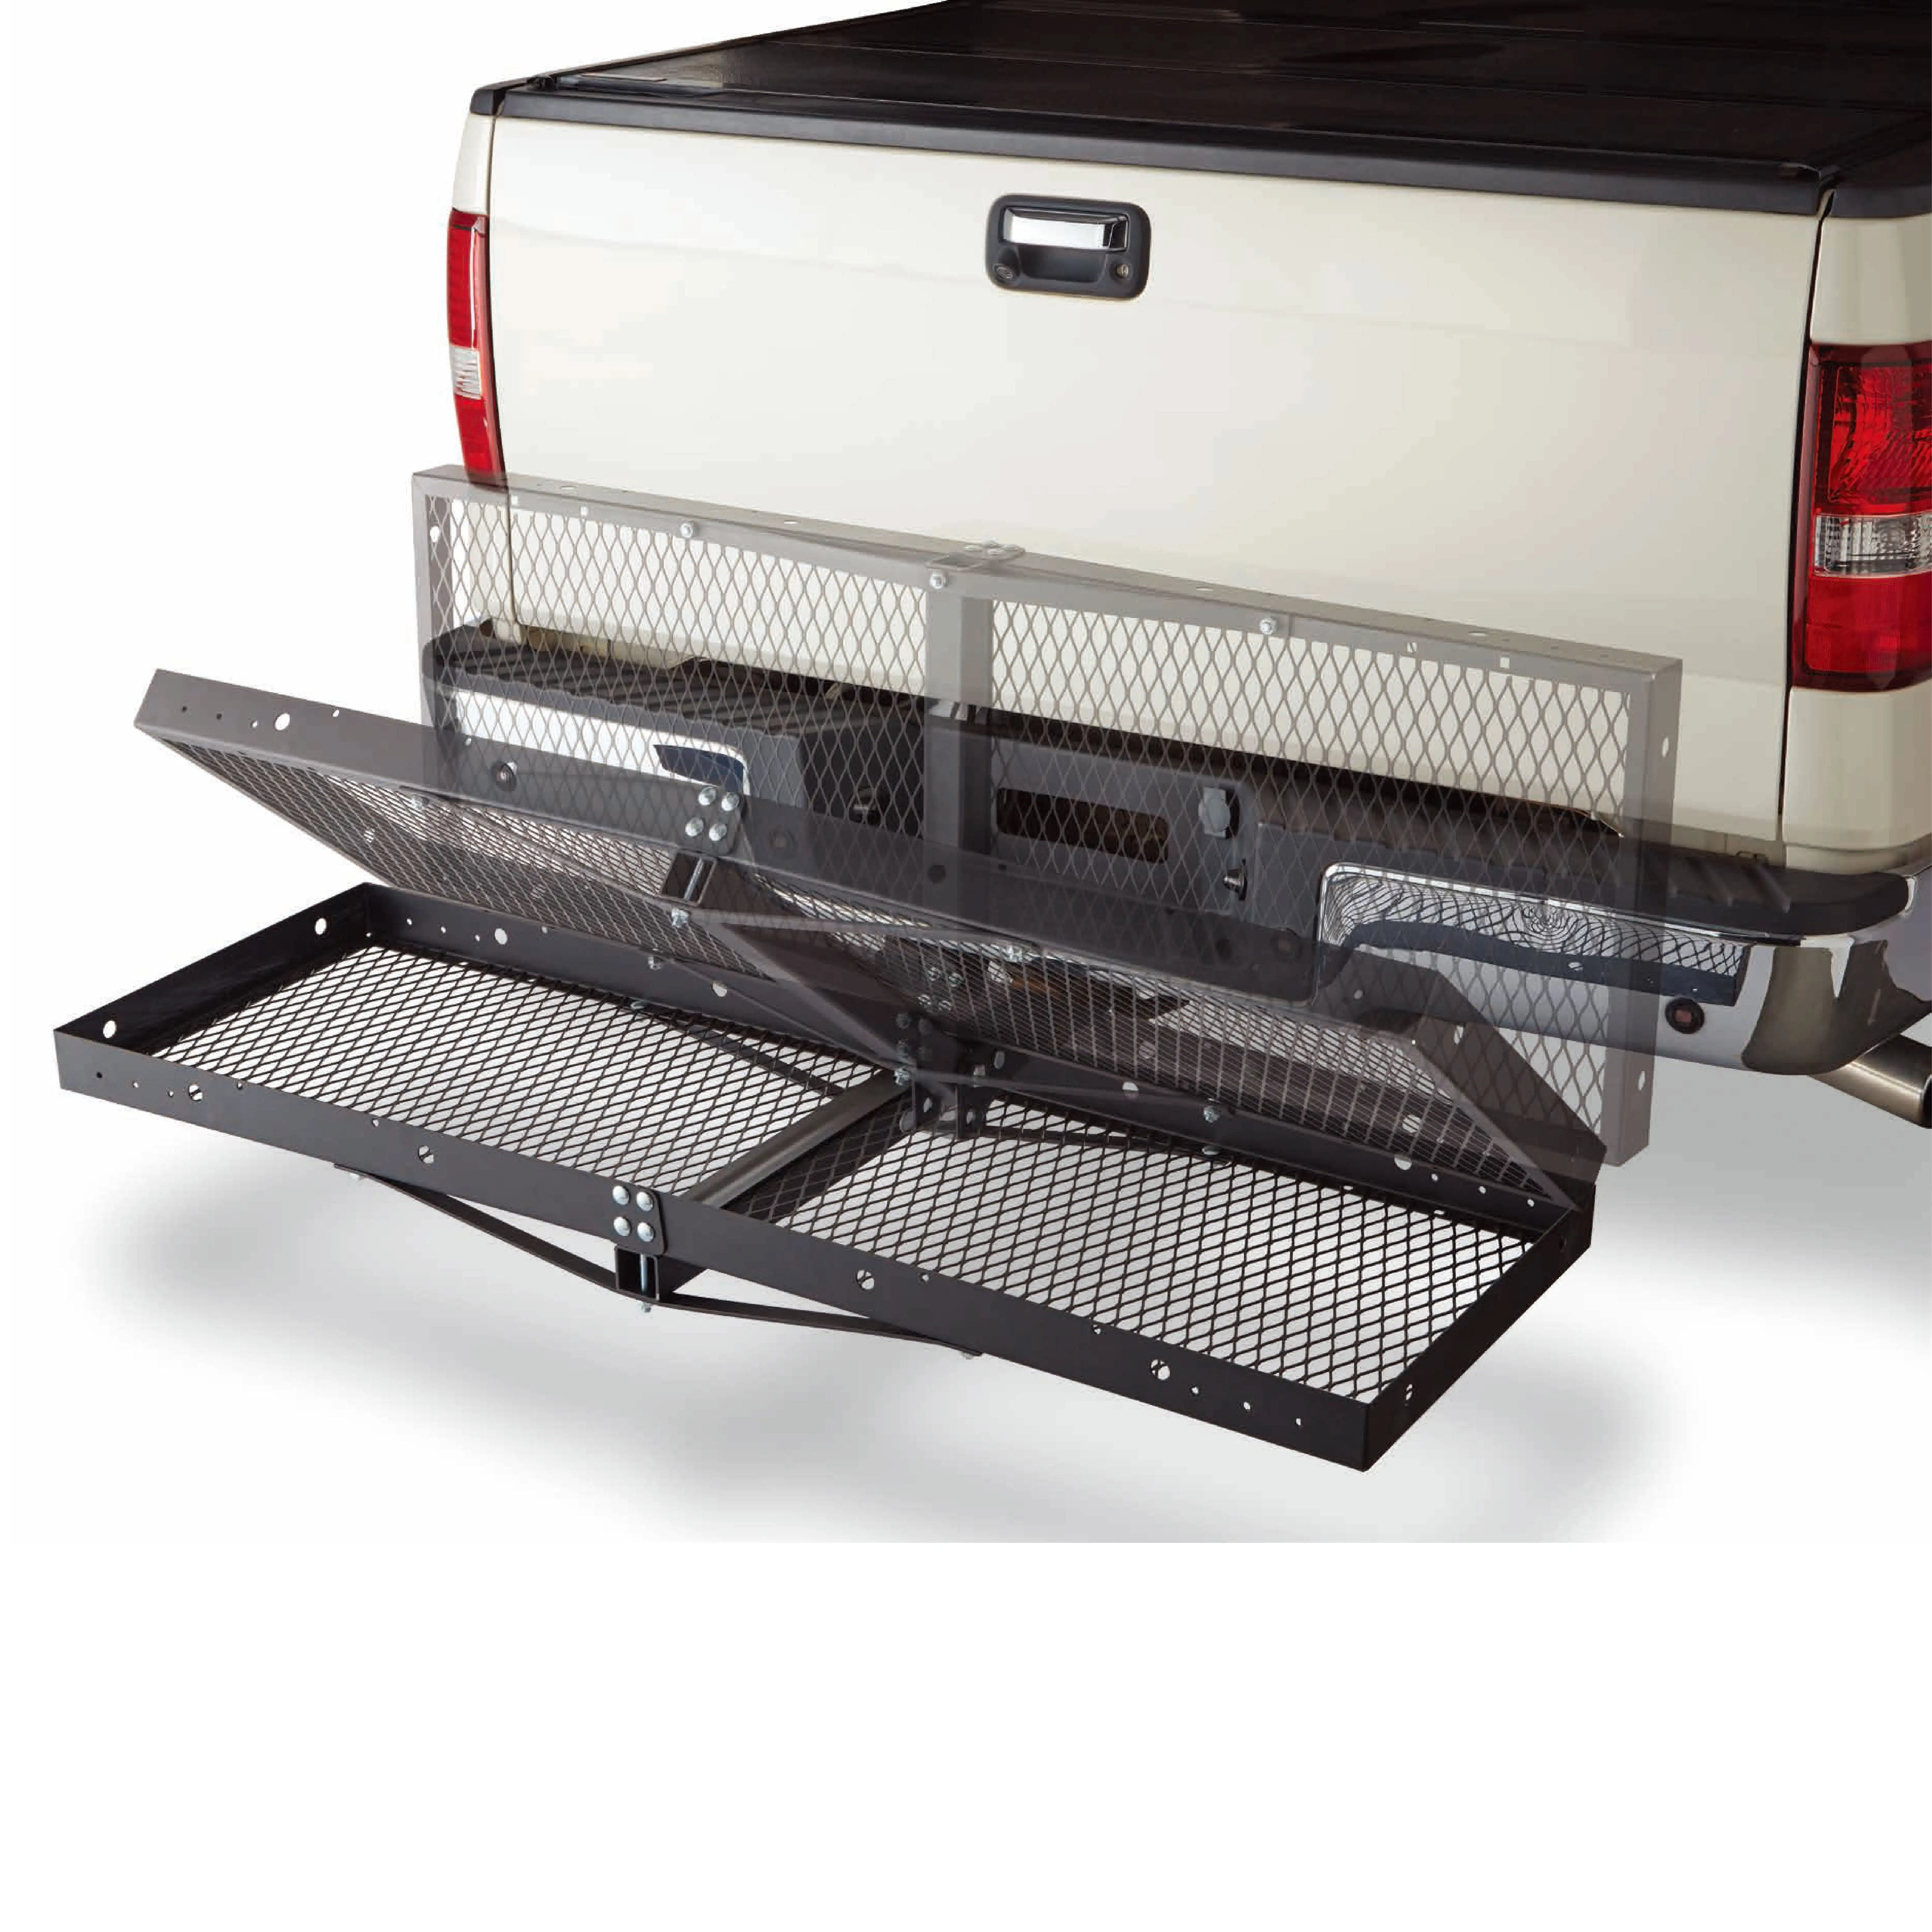 

Folding Hitch Cargo Carrier for Cars, Trucks, and SUVs - Fits 1.25" and 2" Receivers - Model 10101168